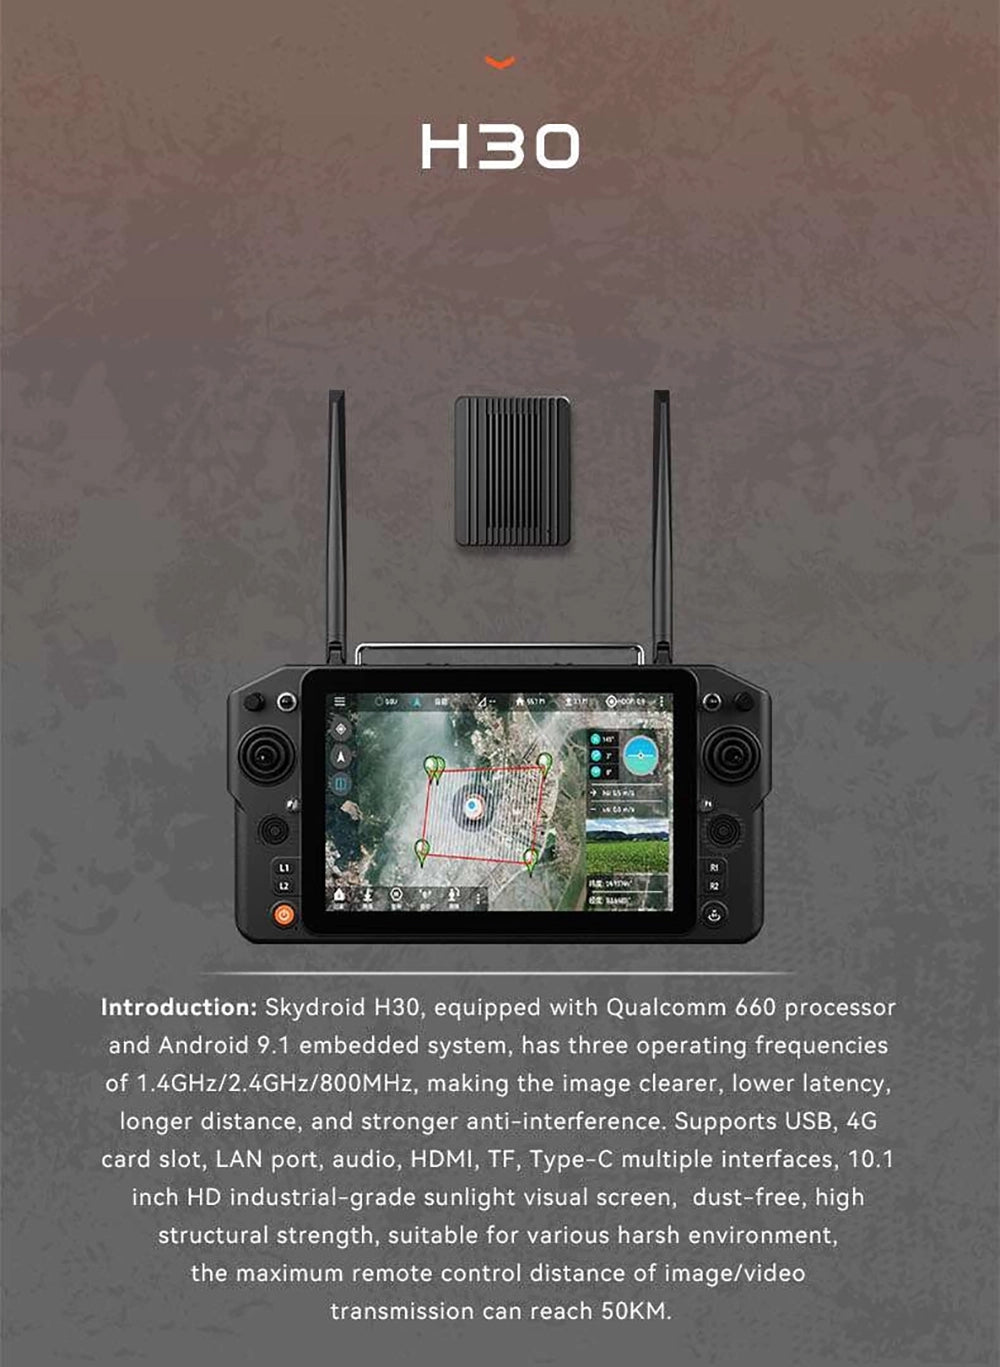 Skydroid H30 Remote Controller, Skydroid H30 has three operating frequencies of 1.4GHz/2 4GHz/8OOMHz